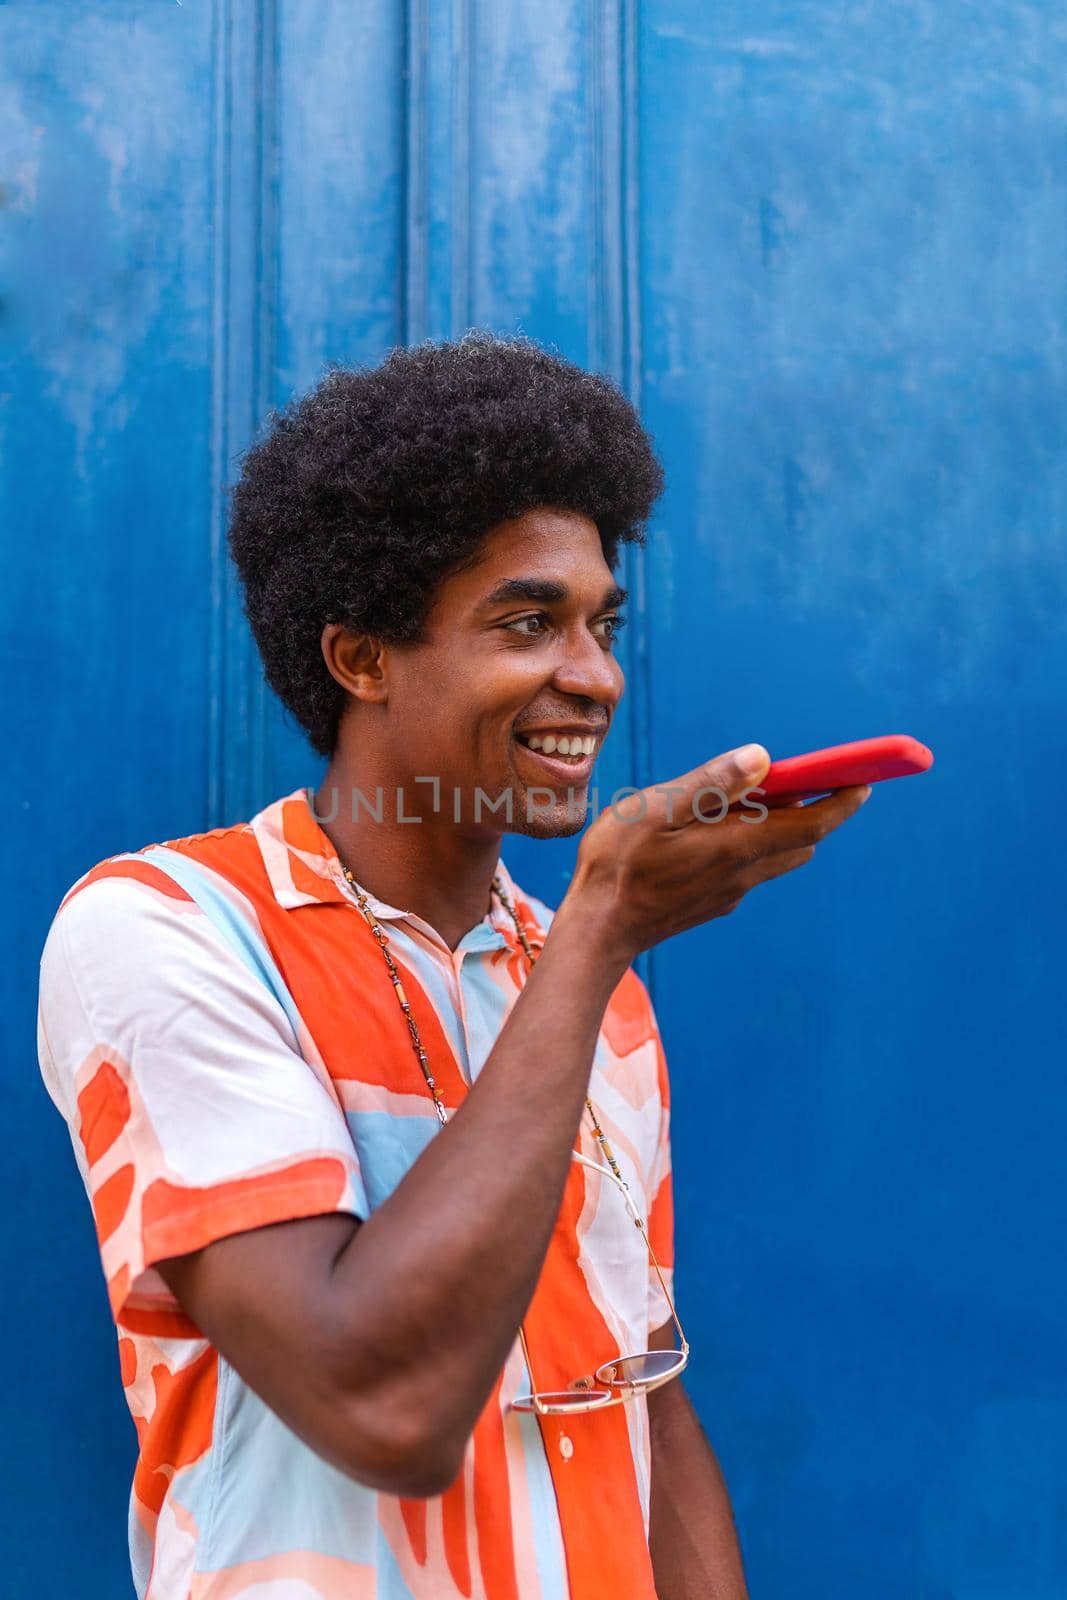 Happy black man with afro haistyle recording voice note using mobile phone in the street. African American man using phone to send voice message. Vertical image. Technology concept.